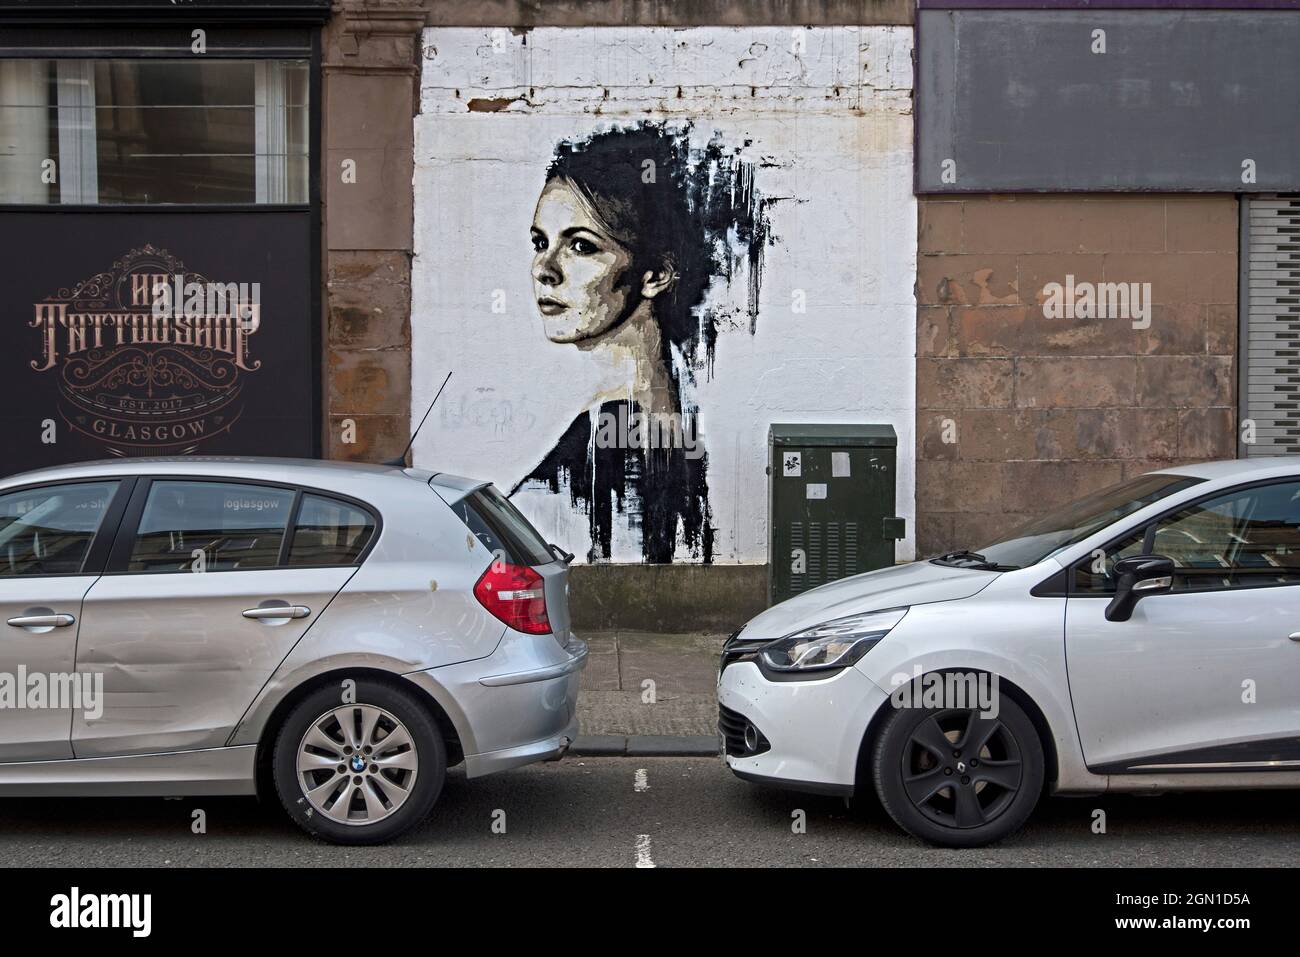 Woman In Black Study 2 by James Klinge in St Andrews Street and part of the Glasgow Mural Trail. Stock Photo